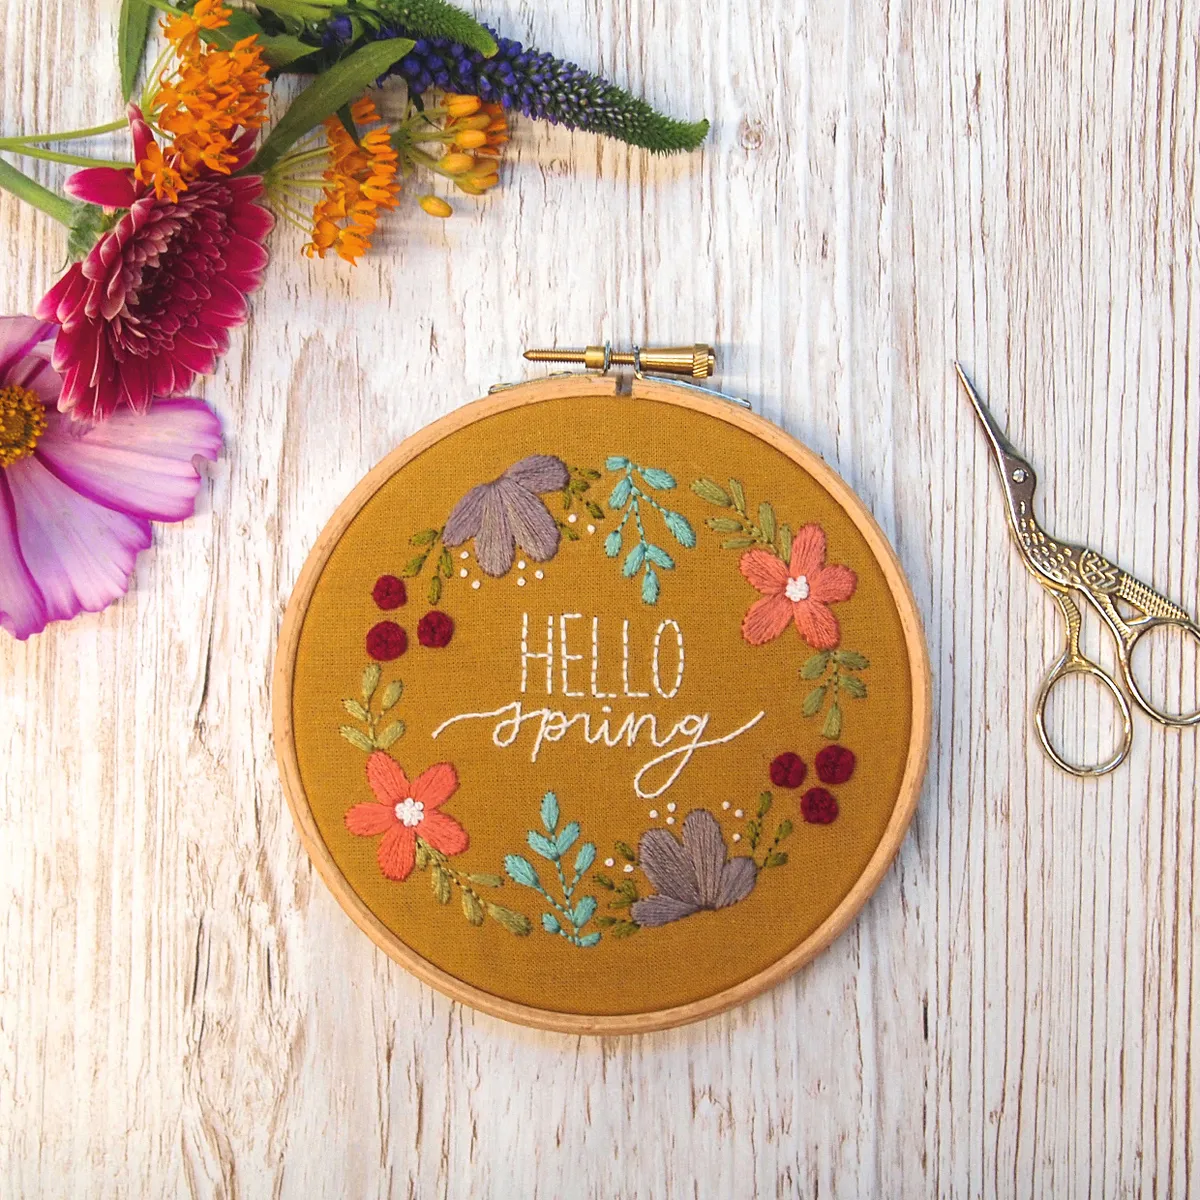 Spring embroidery hoop square